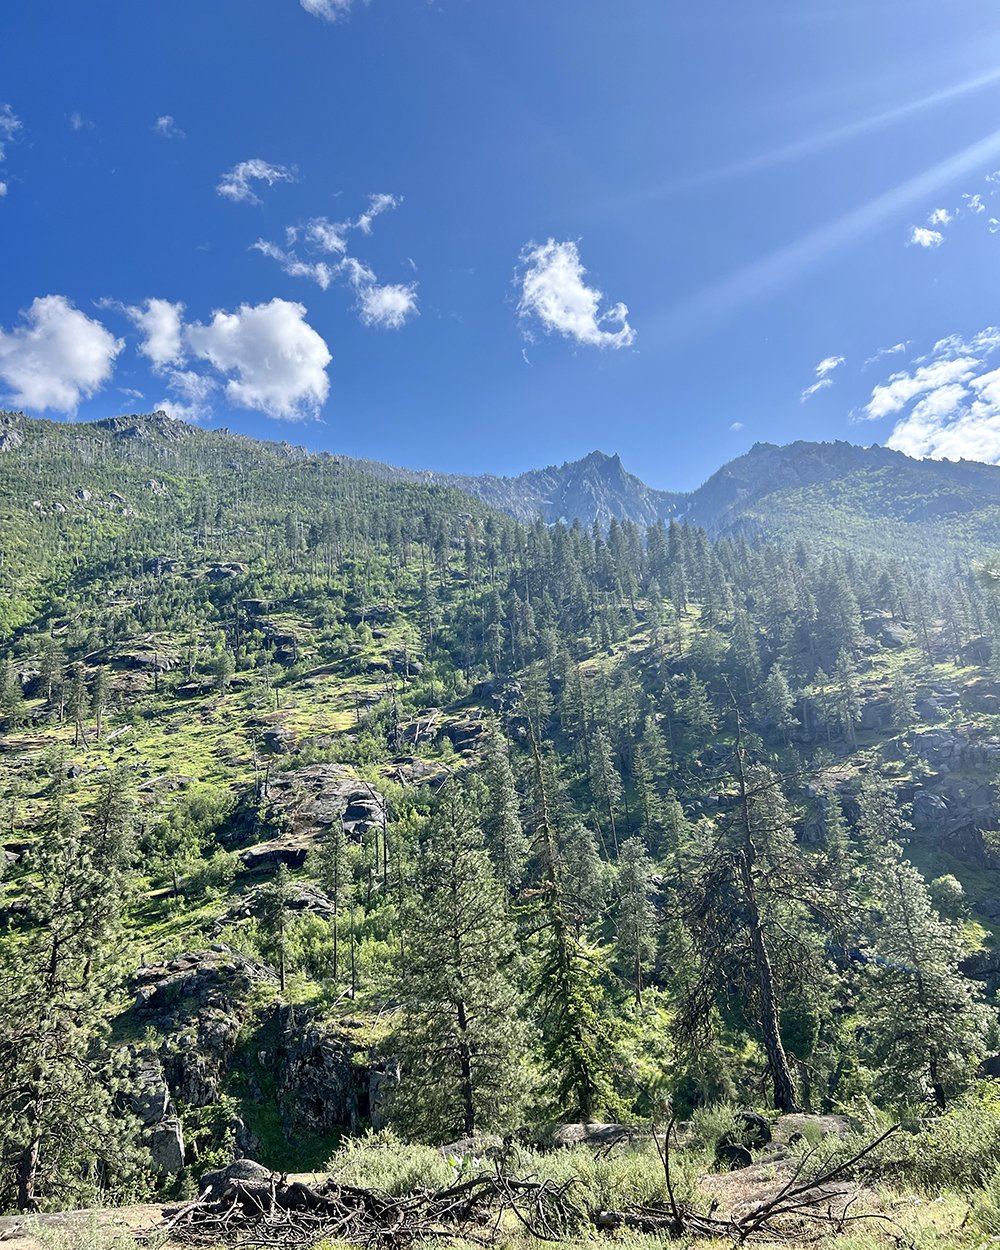  The views while bouldering in Leavenworth are stunning.  